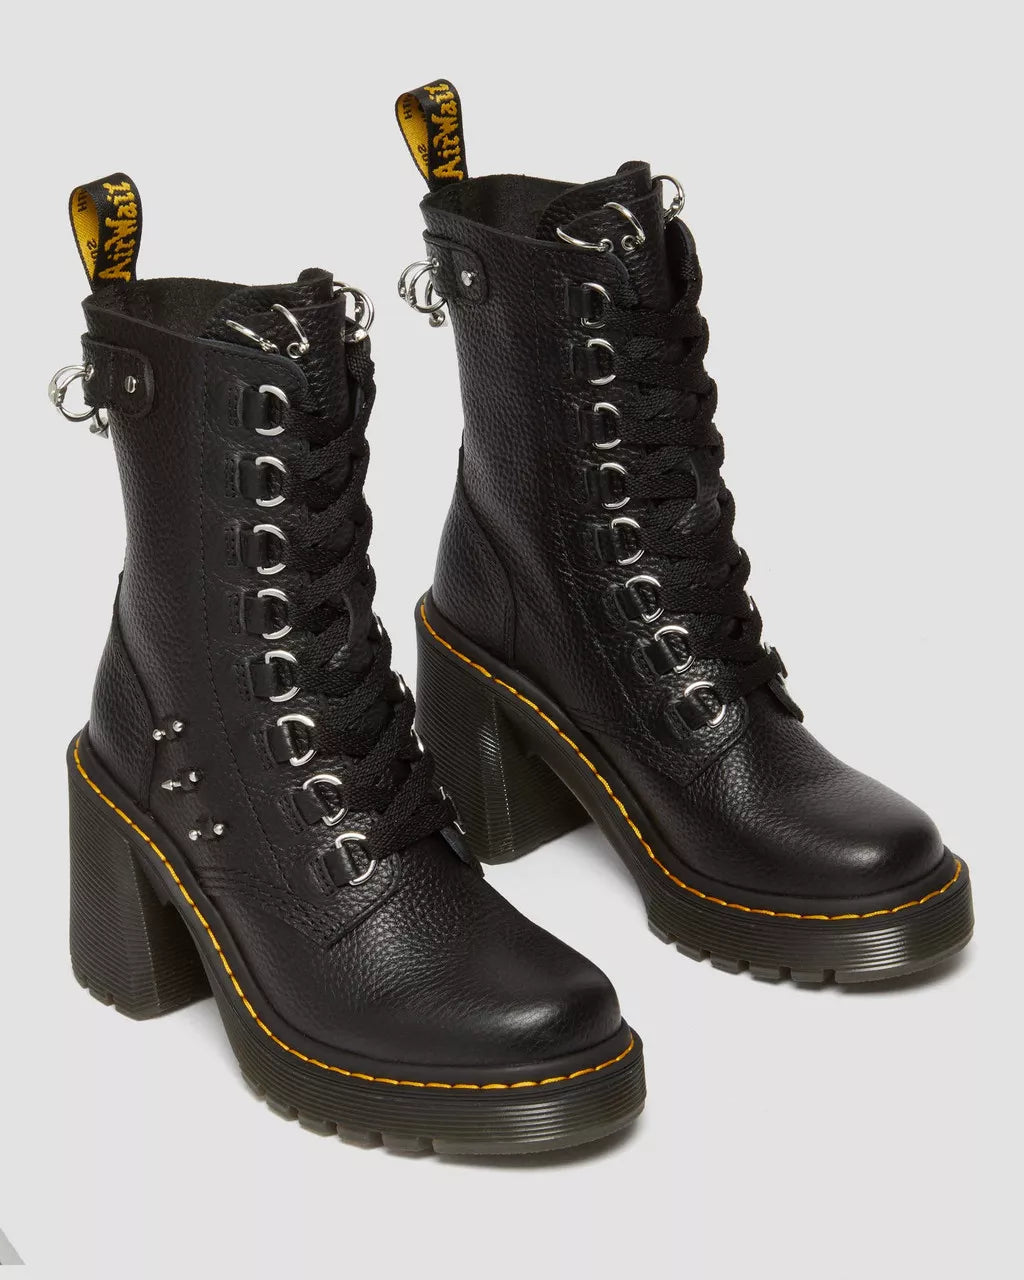 Chesney Piercing Leather Flared Heel Lace Up Boots